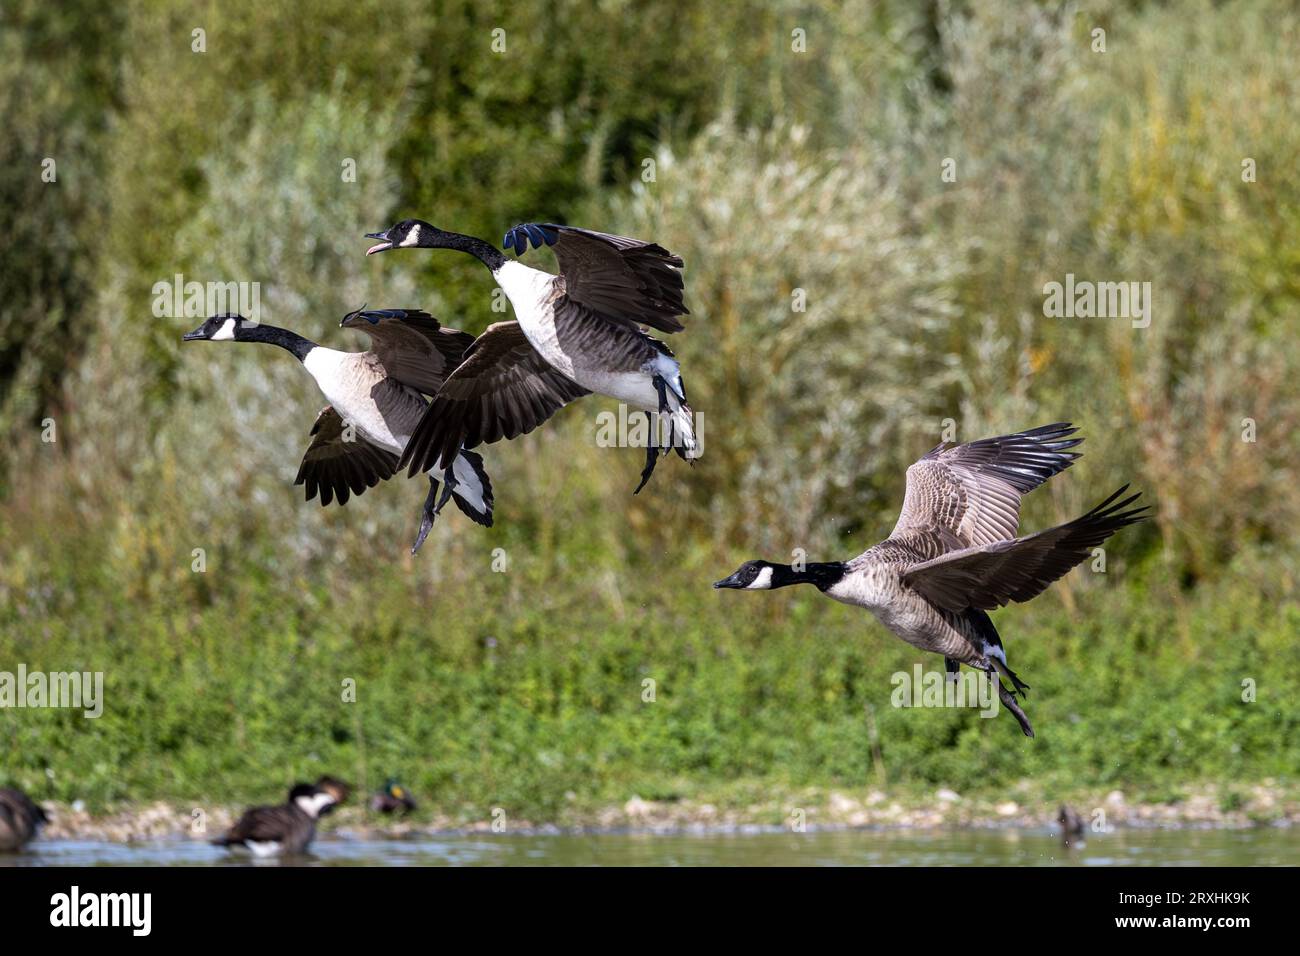 Canada geese in flight. Stock Photo